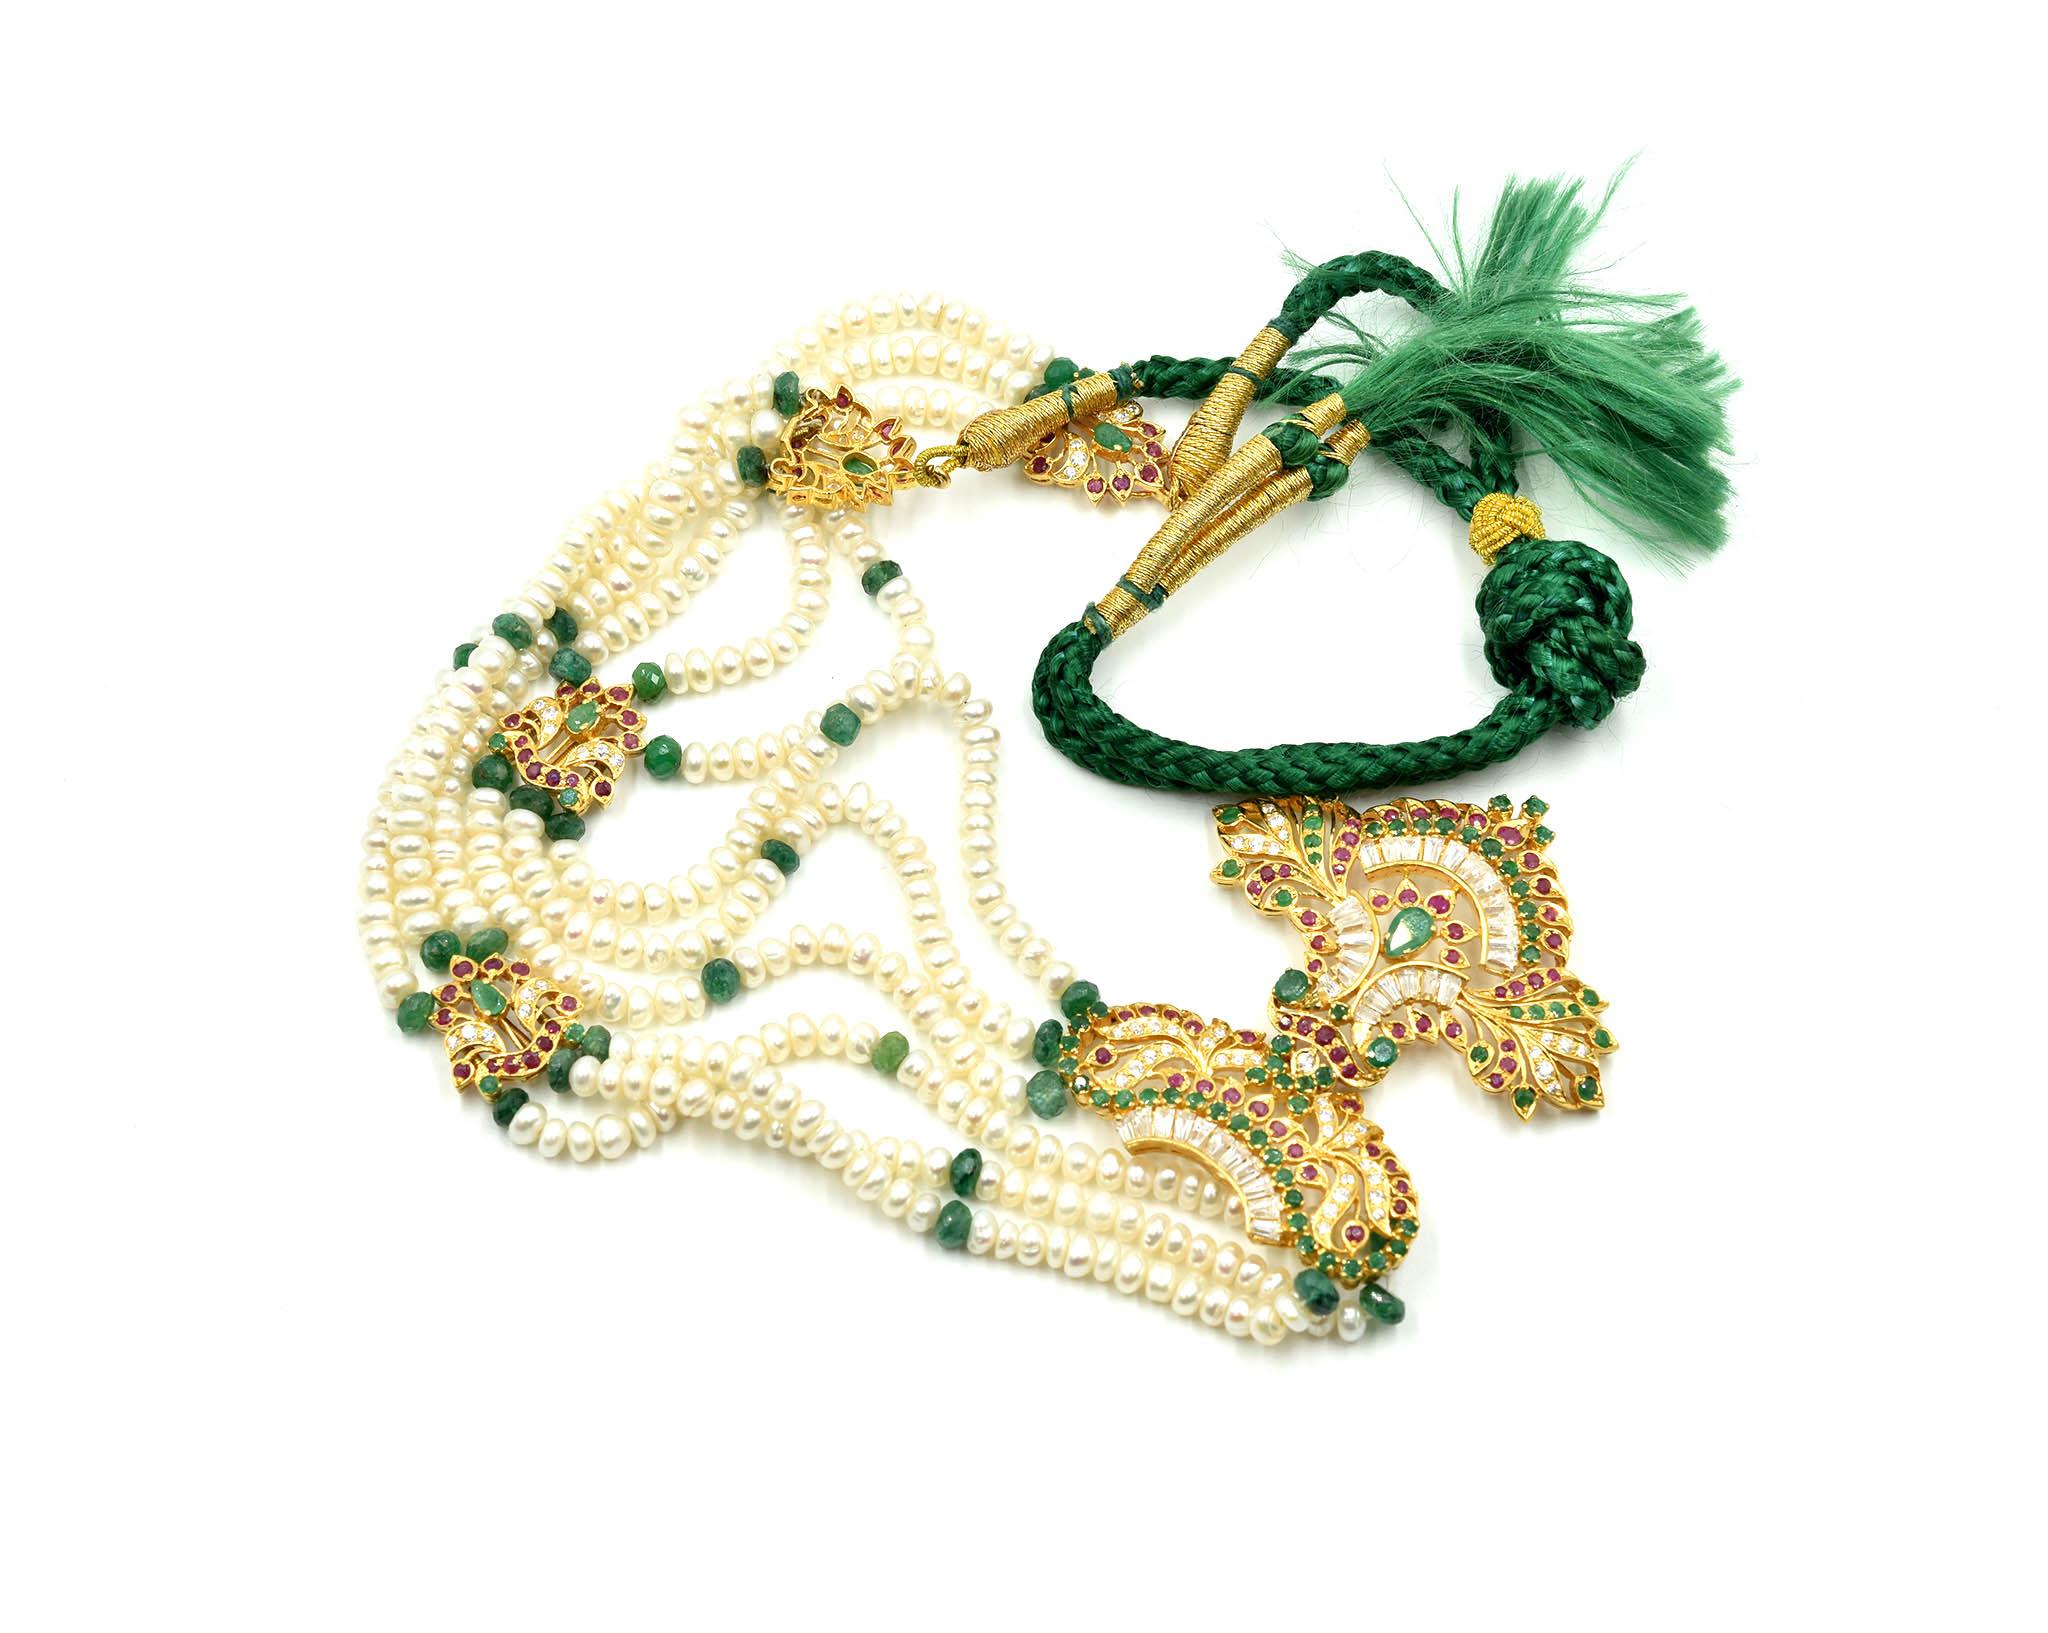 This necklace consists of ruby, emerald, CZ strung with pearls. Accentuating the pearl strung necklace are accents made with 22k yellow gold set with rubies and emeralds. Faceted bead emeralds are stationed along the necklace. The front of the